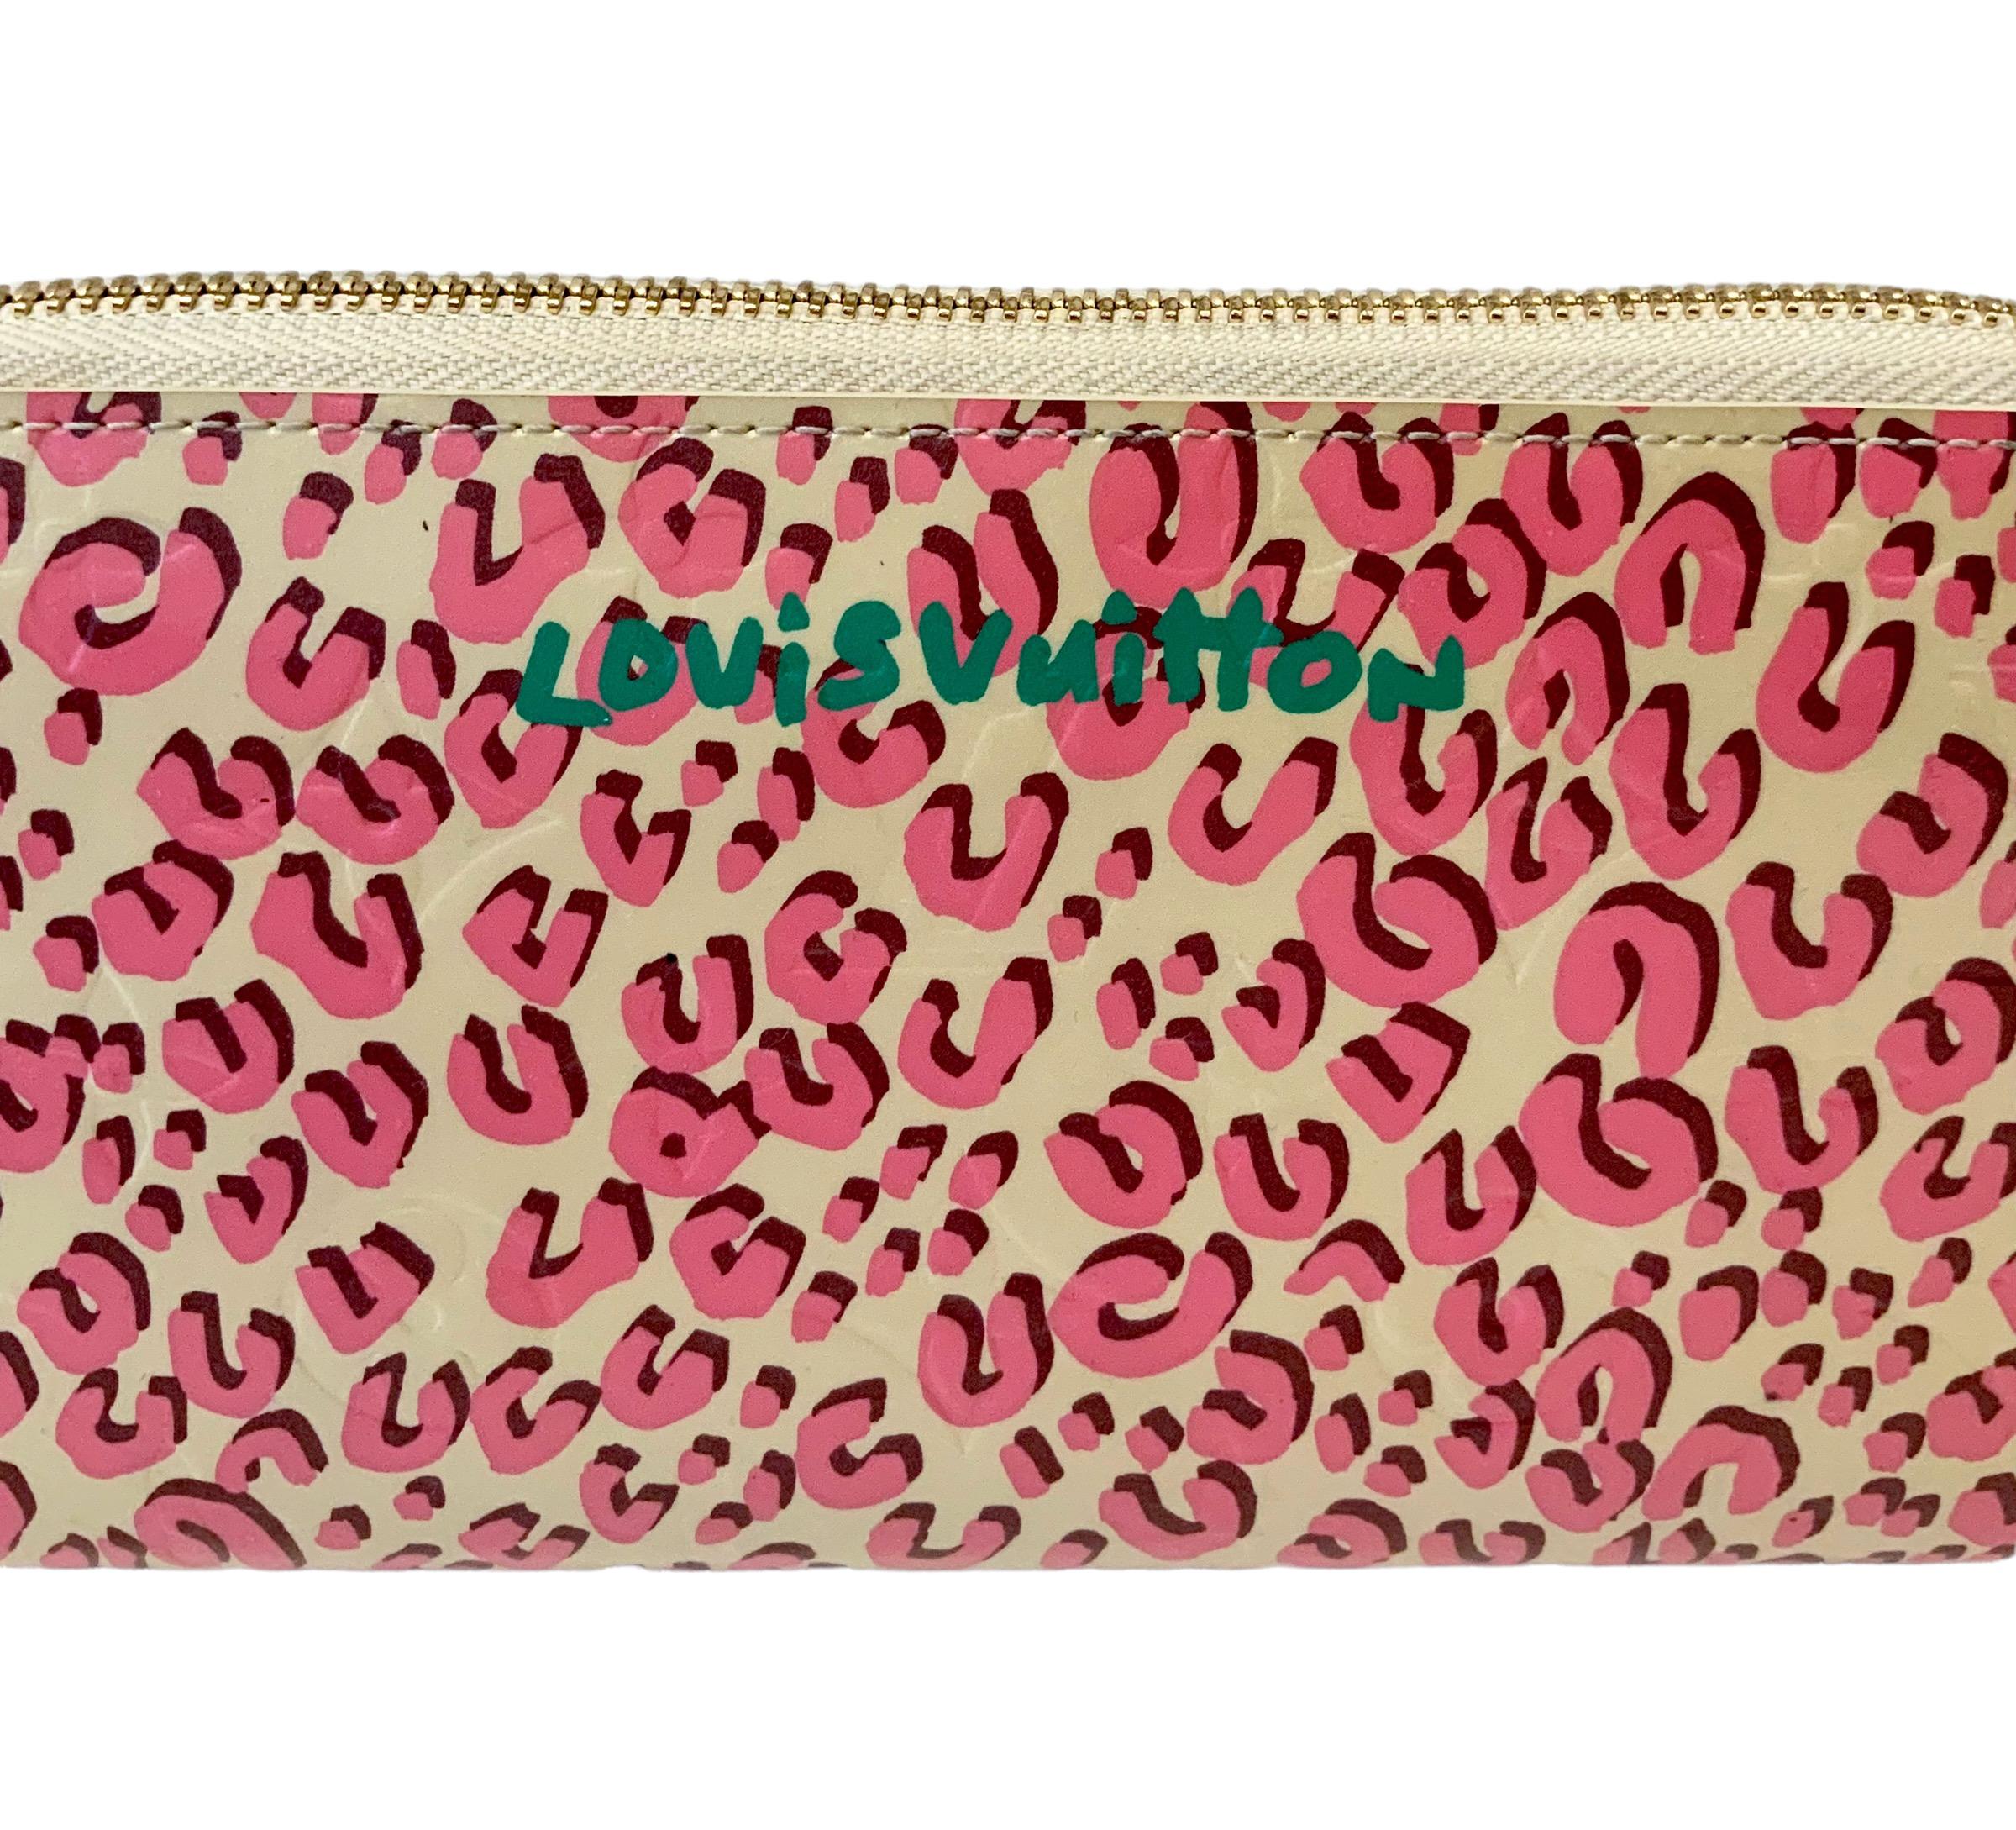 Pre-owned but new Zippy wallet from the collaboration of Stephen Sprouse with Louis Vuitton.

Collection: Stephen Sprouse
Material: Patent calfskin leather
Lining: Calfskin leather
Color: Beige and pink
Measurements: Length: 28 cms - approx. 11